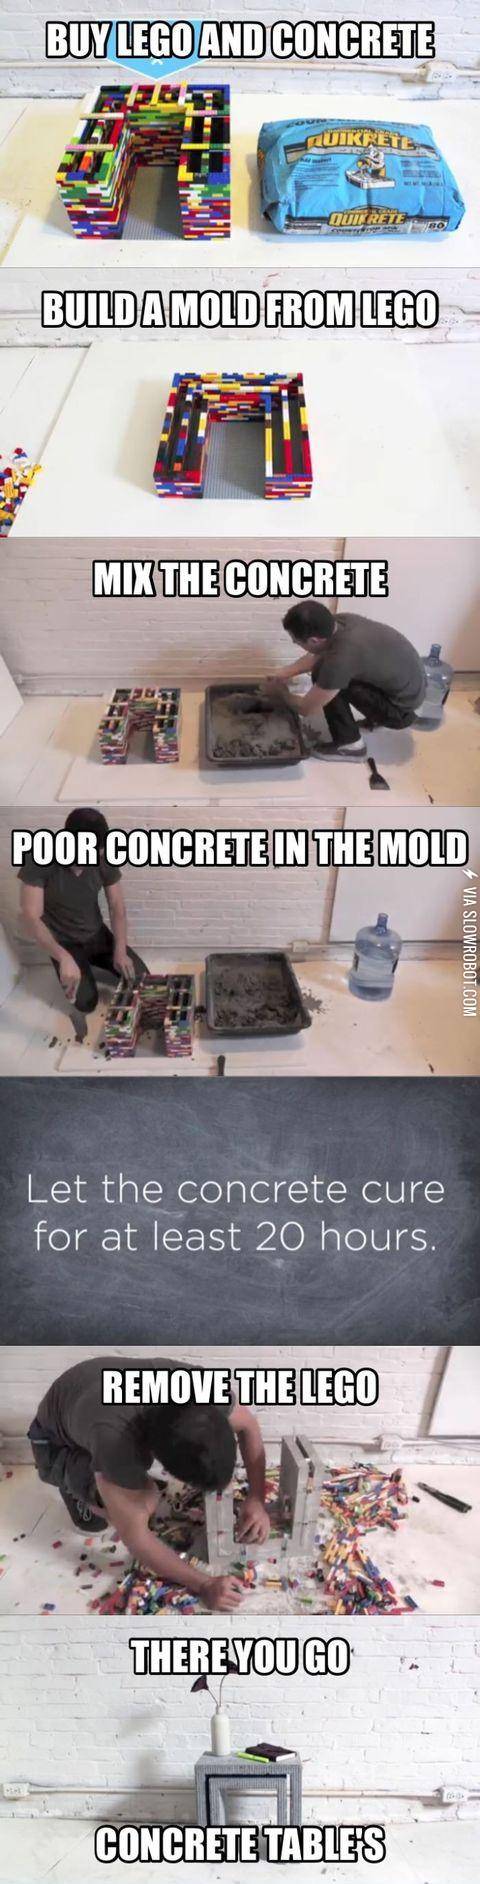 Building+with+LEGO+concrete+mold